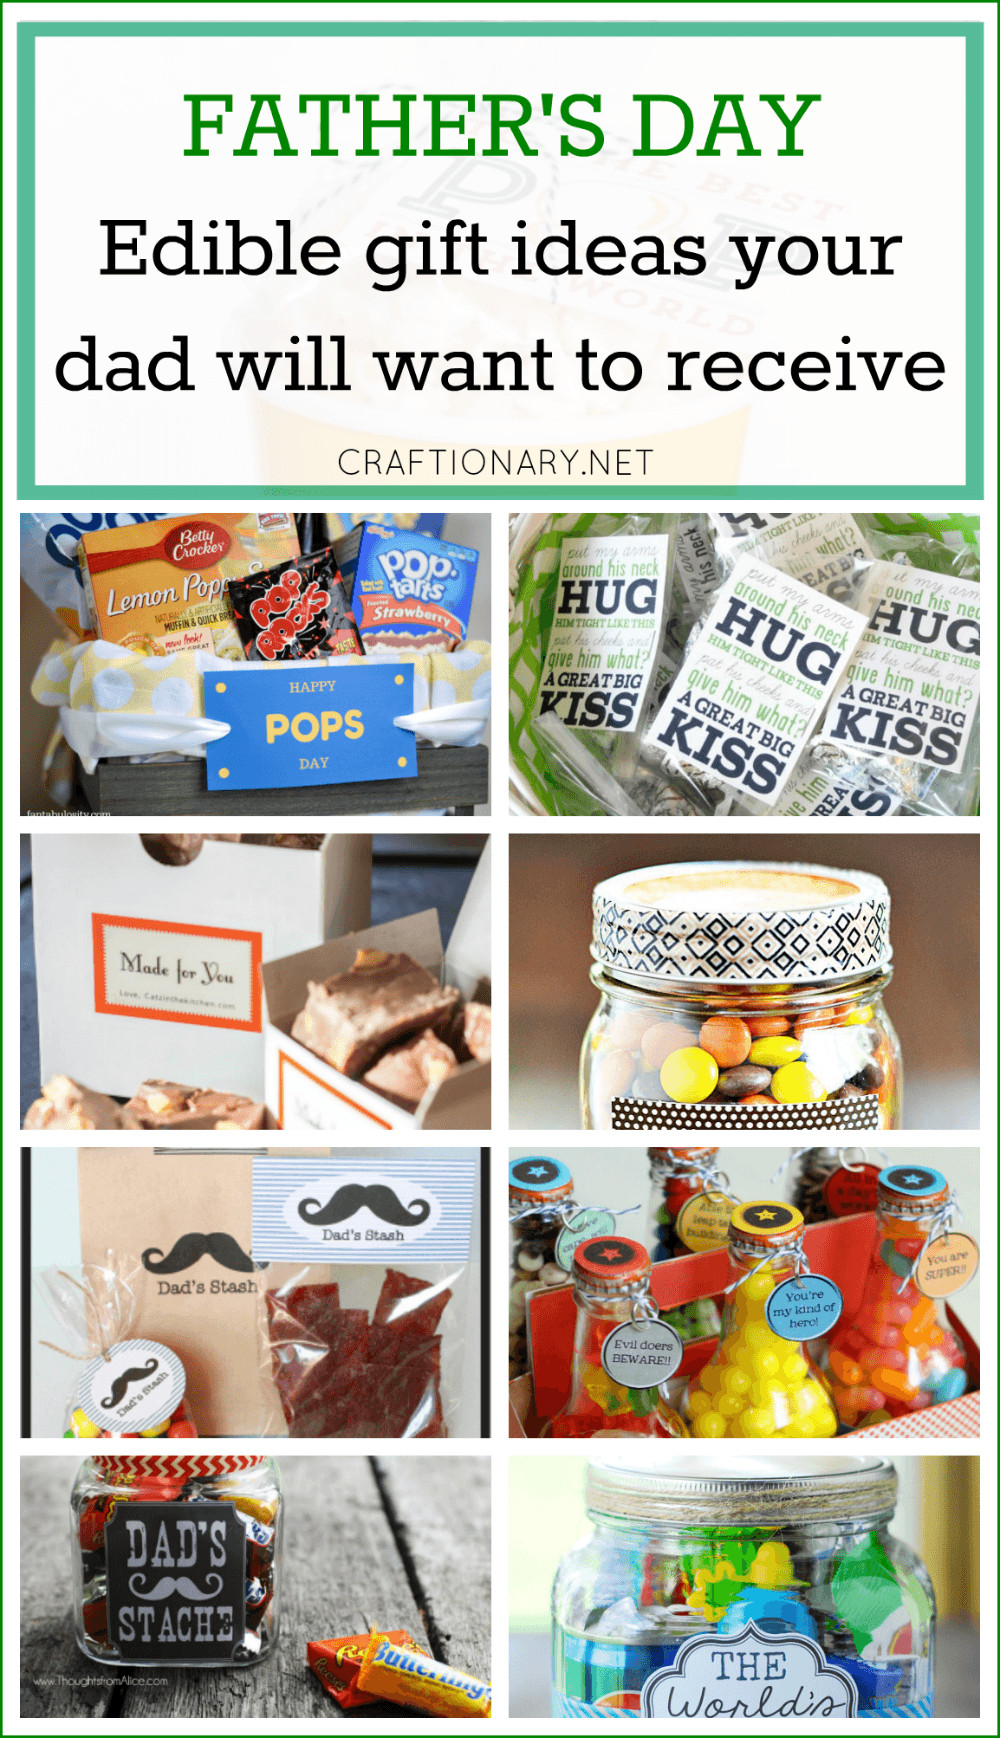 Fathers Days Gift Ideas
 Craftionary